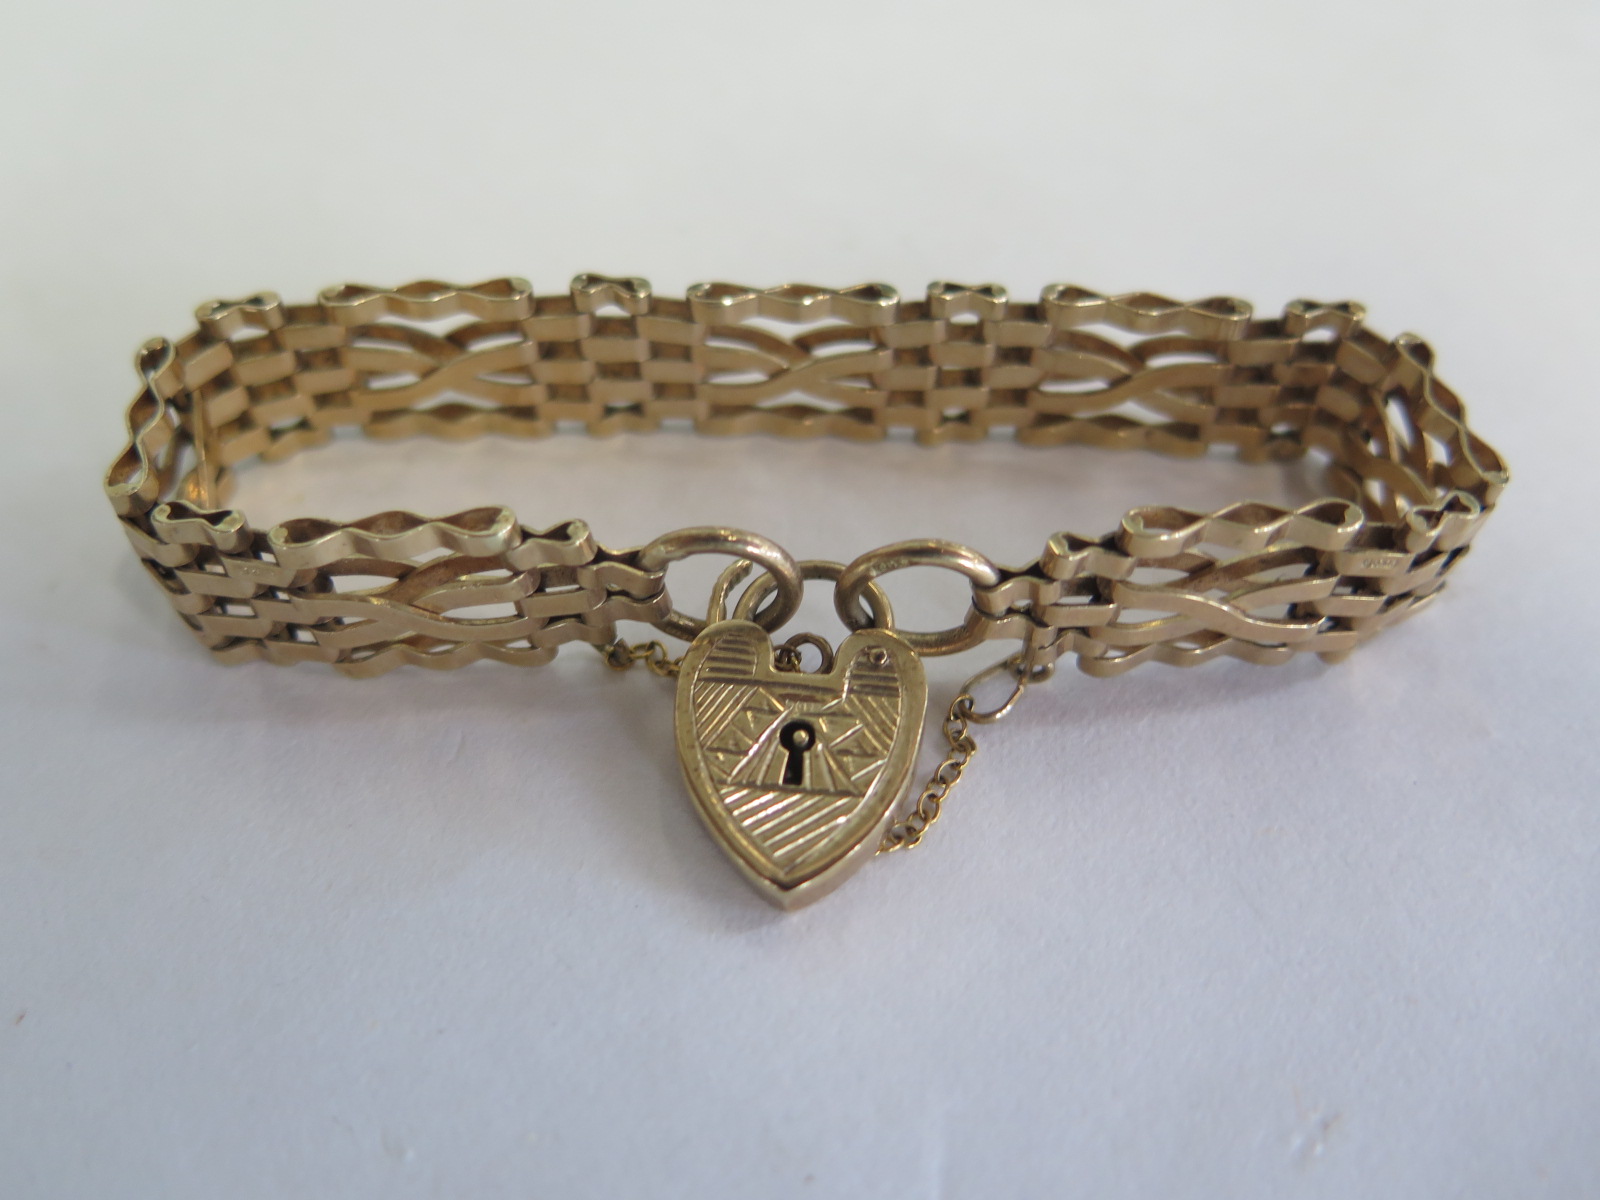 A 9ct yellow gold gate link bracelet - approx 18 grams